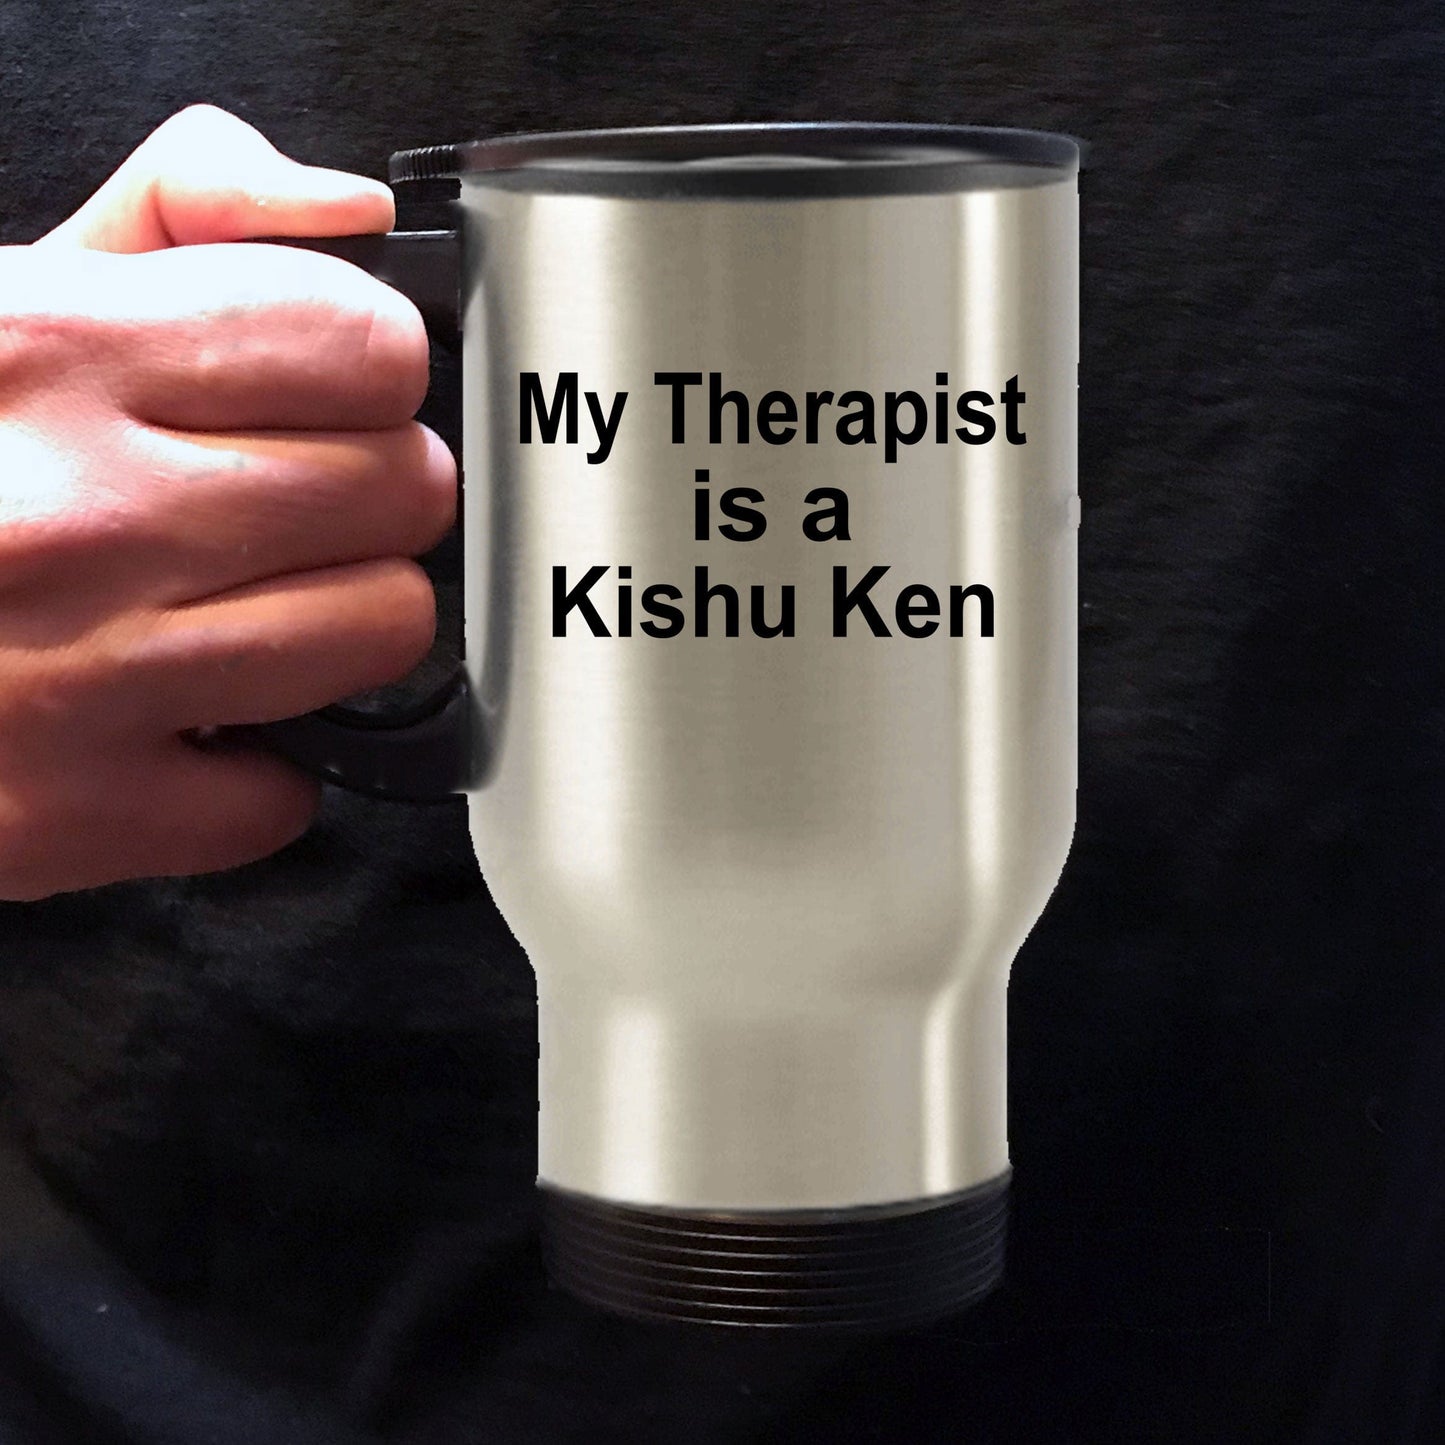 Kishu Ken Dog Owner Lover Funny Gift Therapist Stainless Steel Insulated Travel Coffee Mug